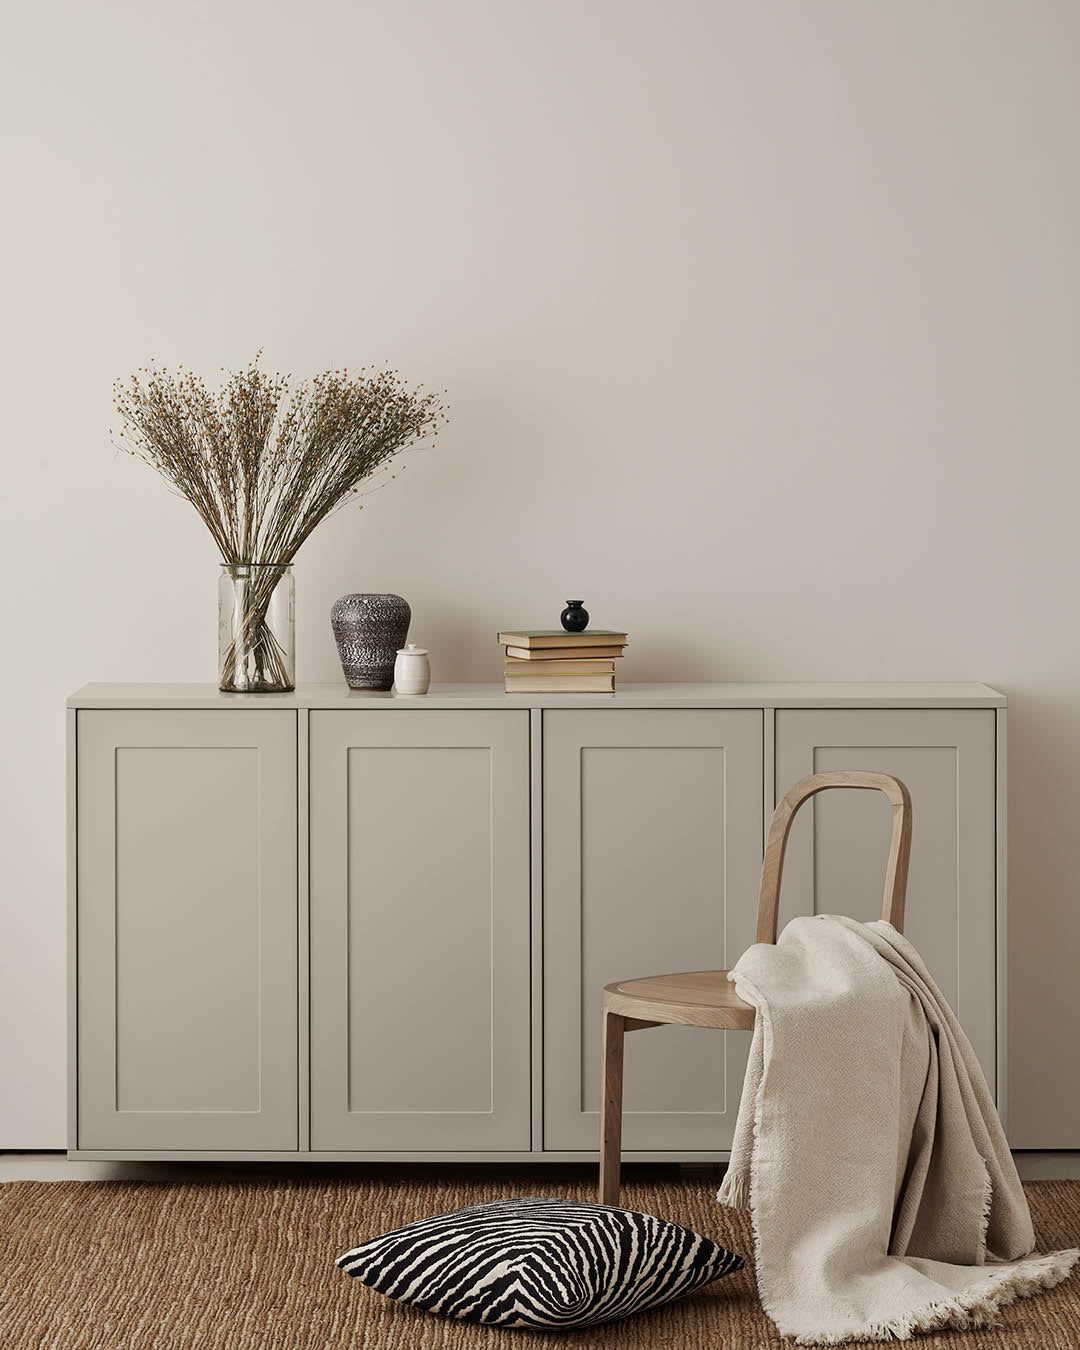 How to style your sideboard